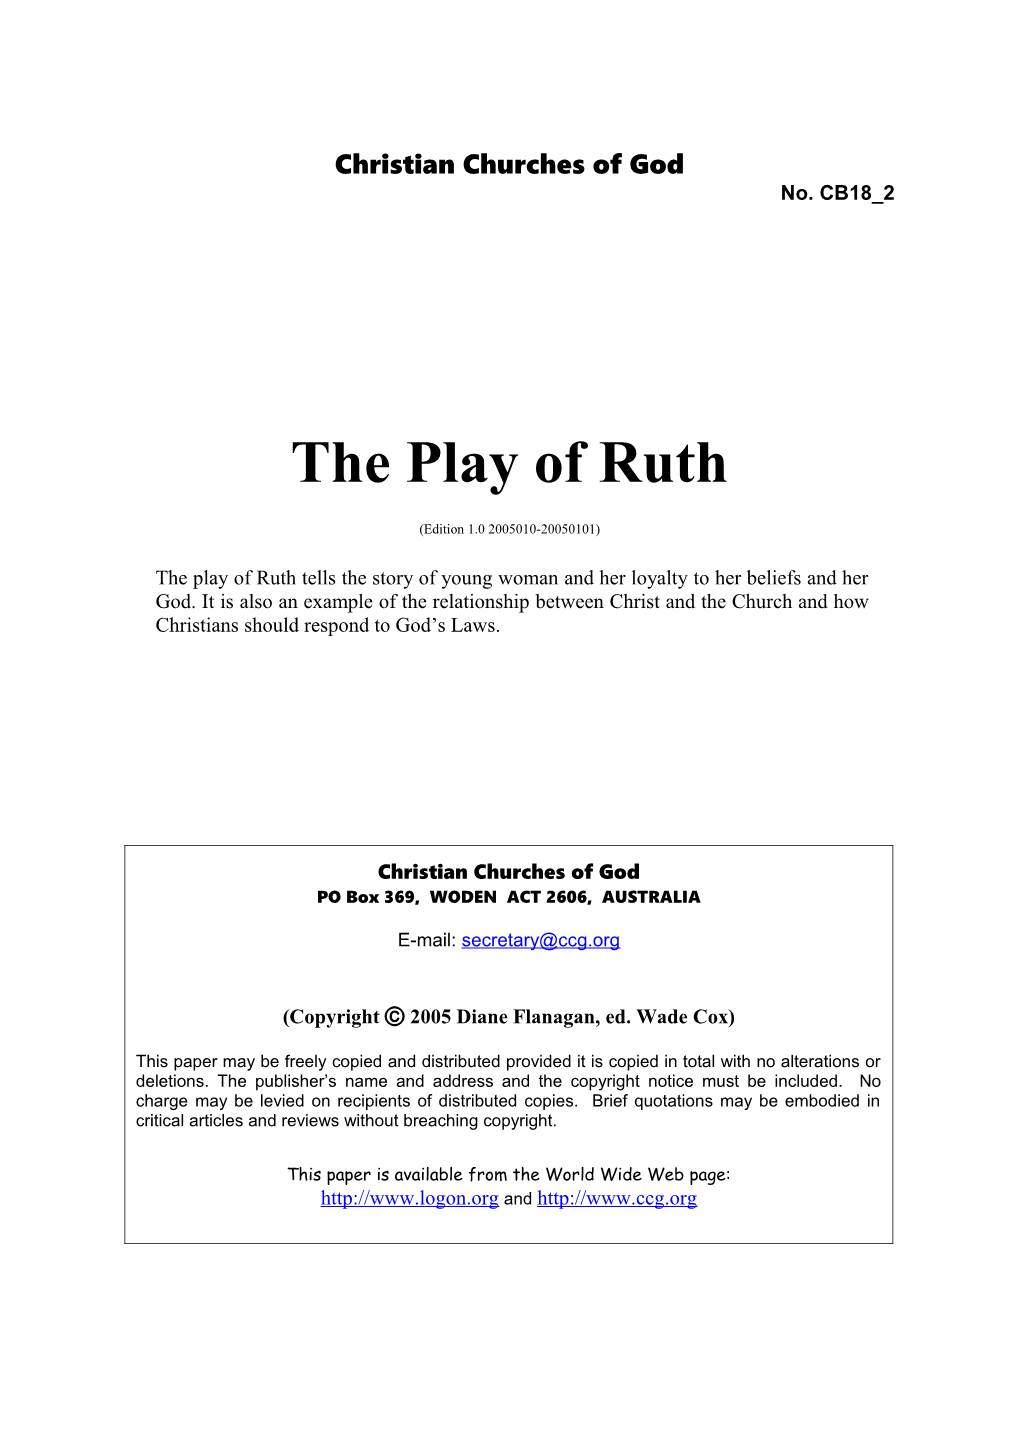 The Play of Ruth (No. CB18 2)